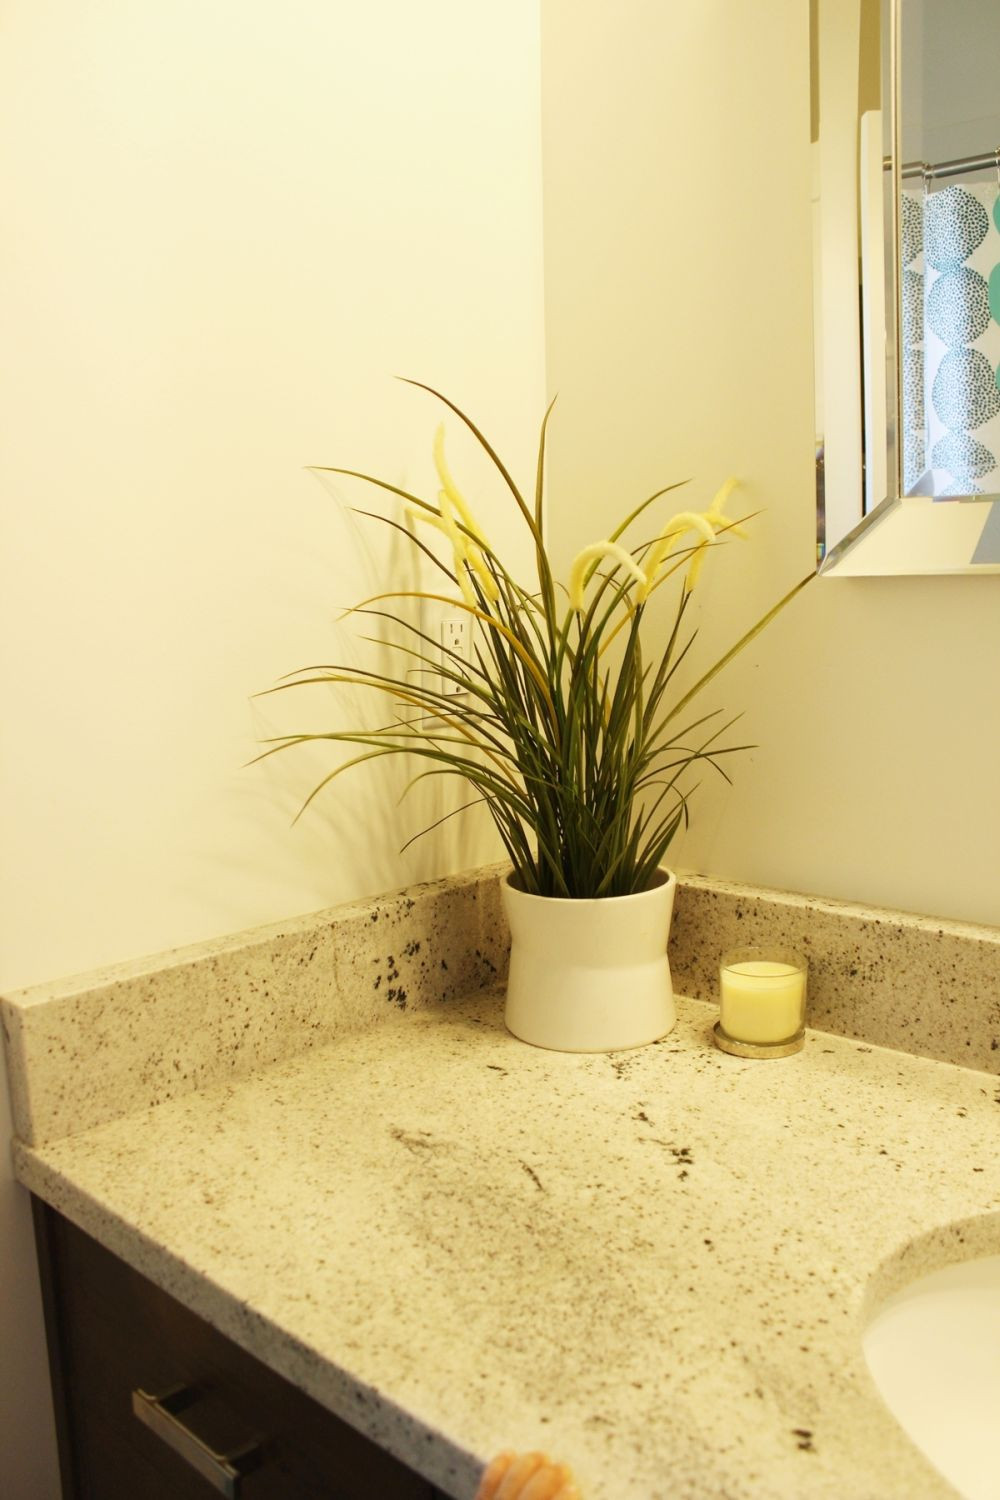 Decorate My Bathroom
 How to Decorate a Bathroom Without Clutter